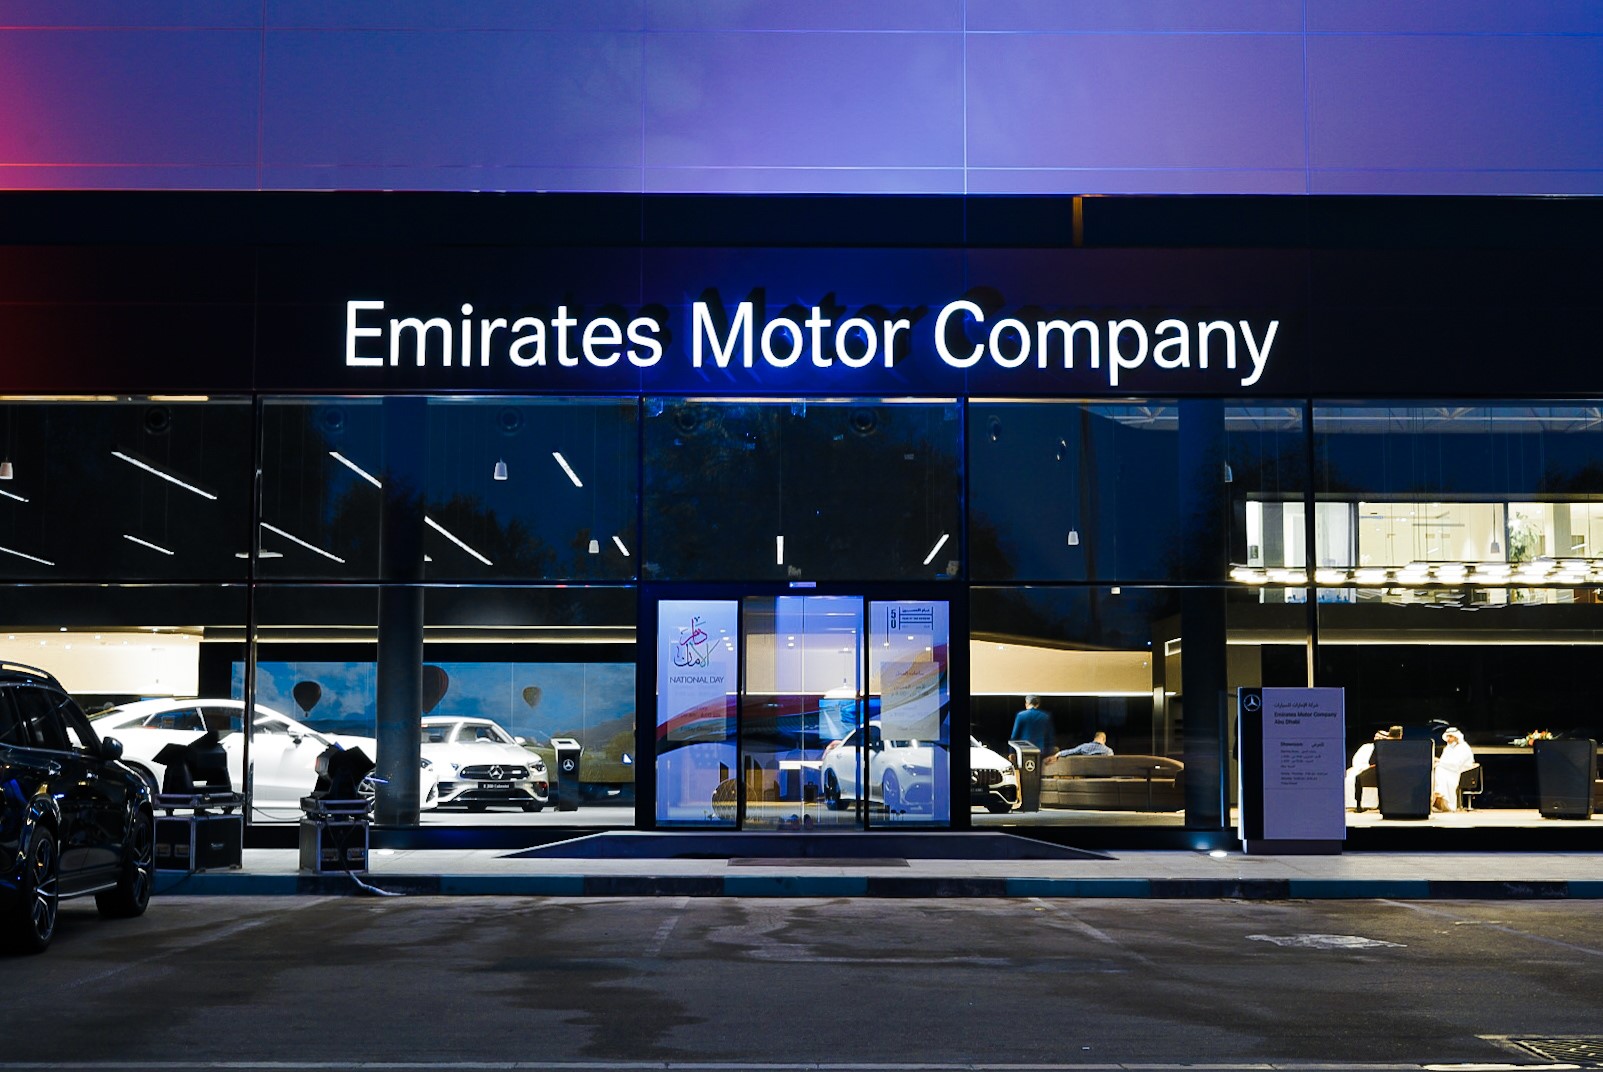 Emirates Motor Company transforms customer experience with its new state-of-the-art Mercedes-Benz showroom in Abu Dhabi